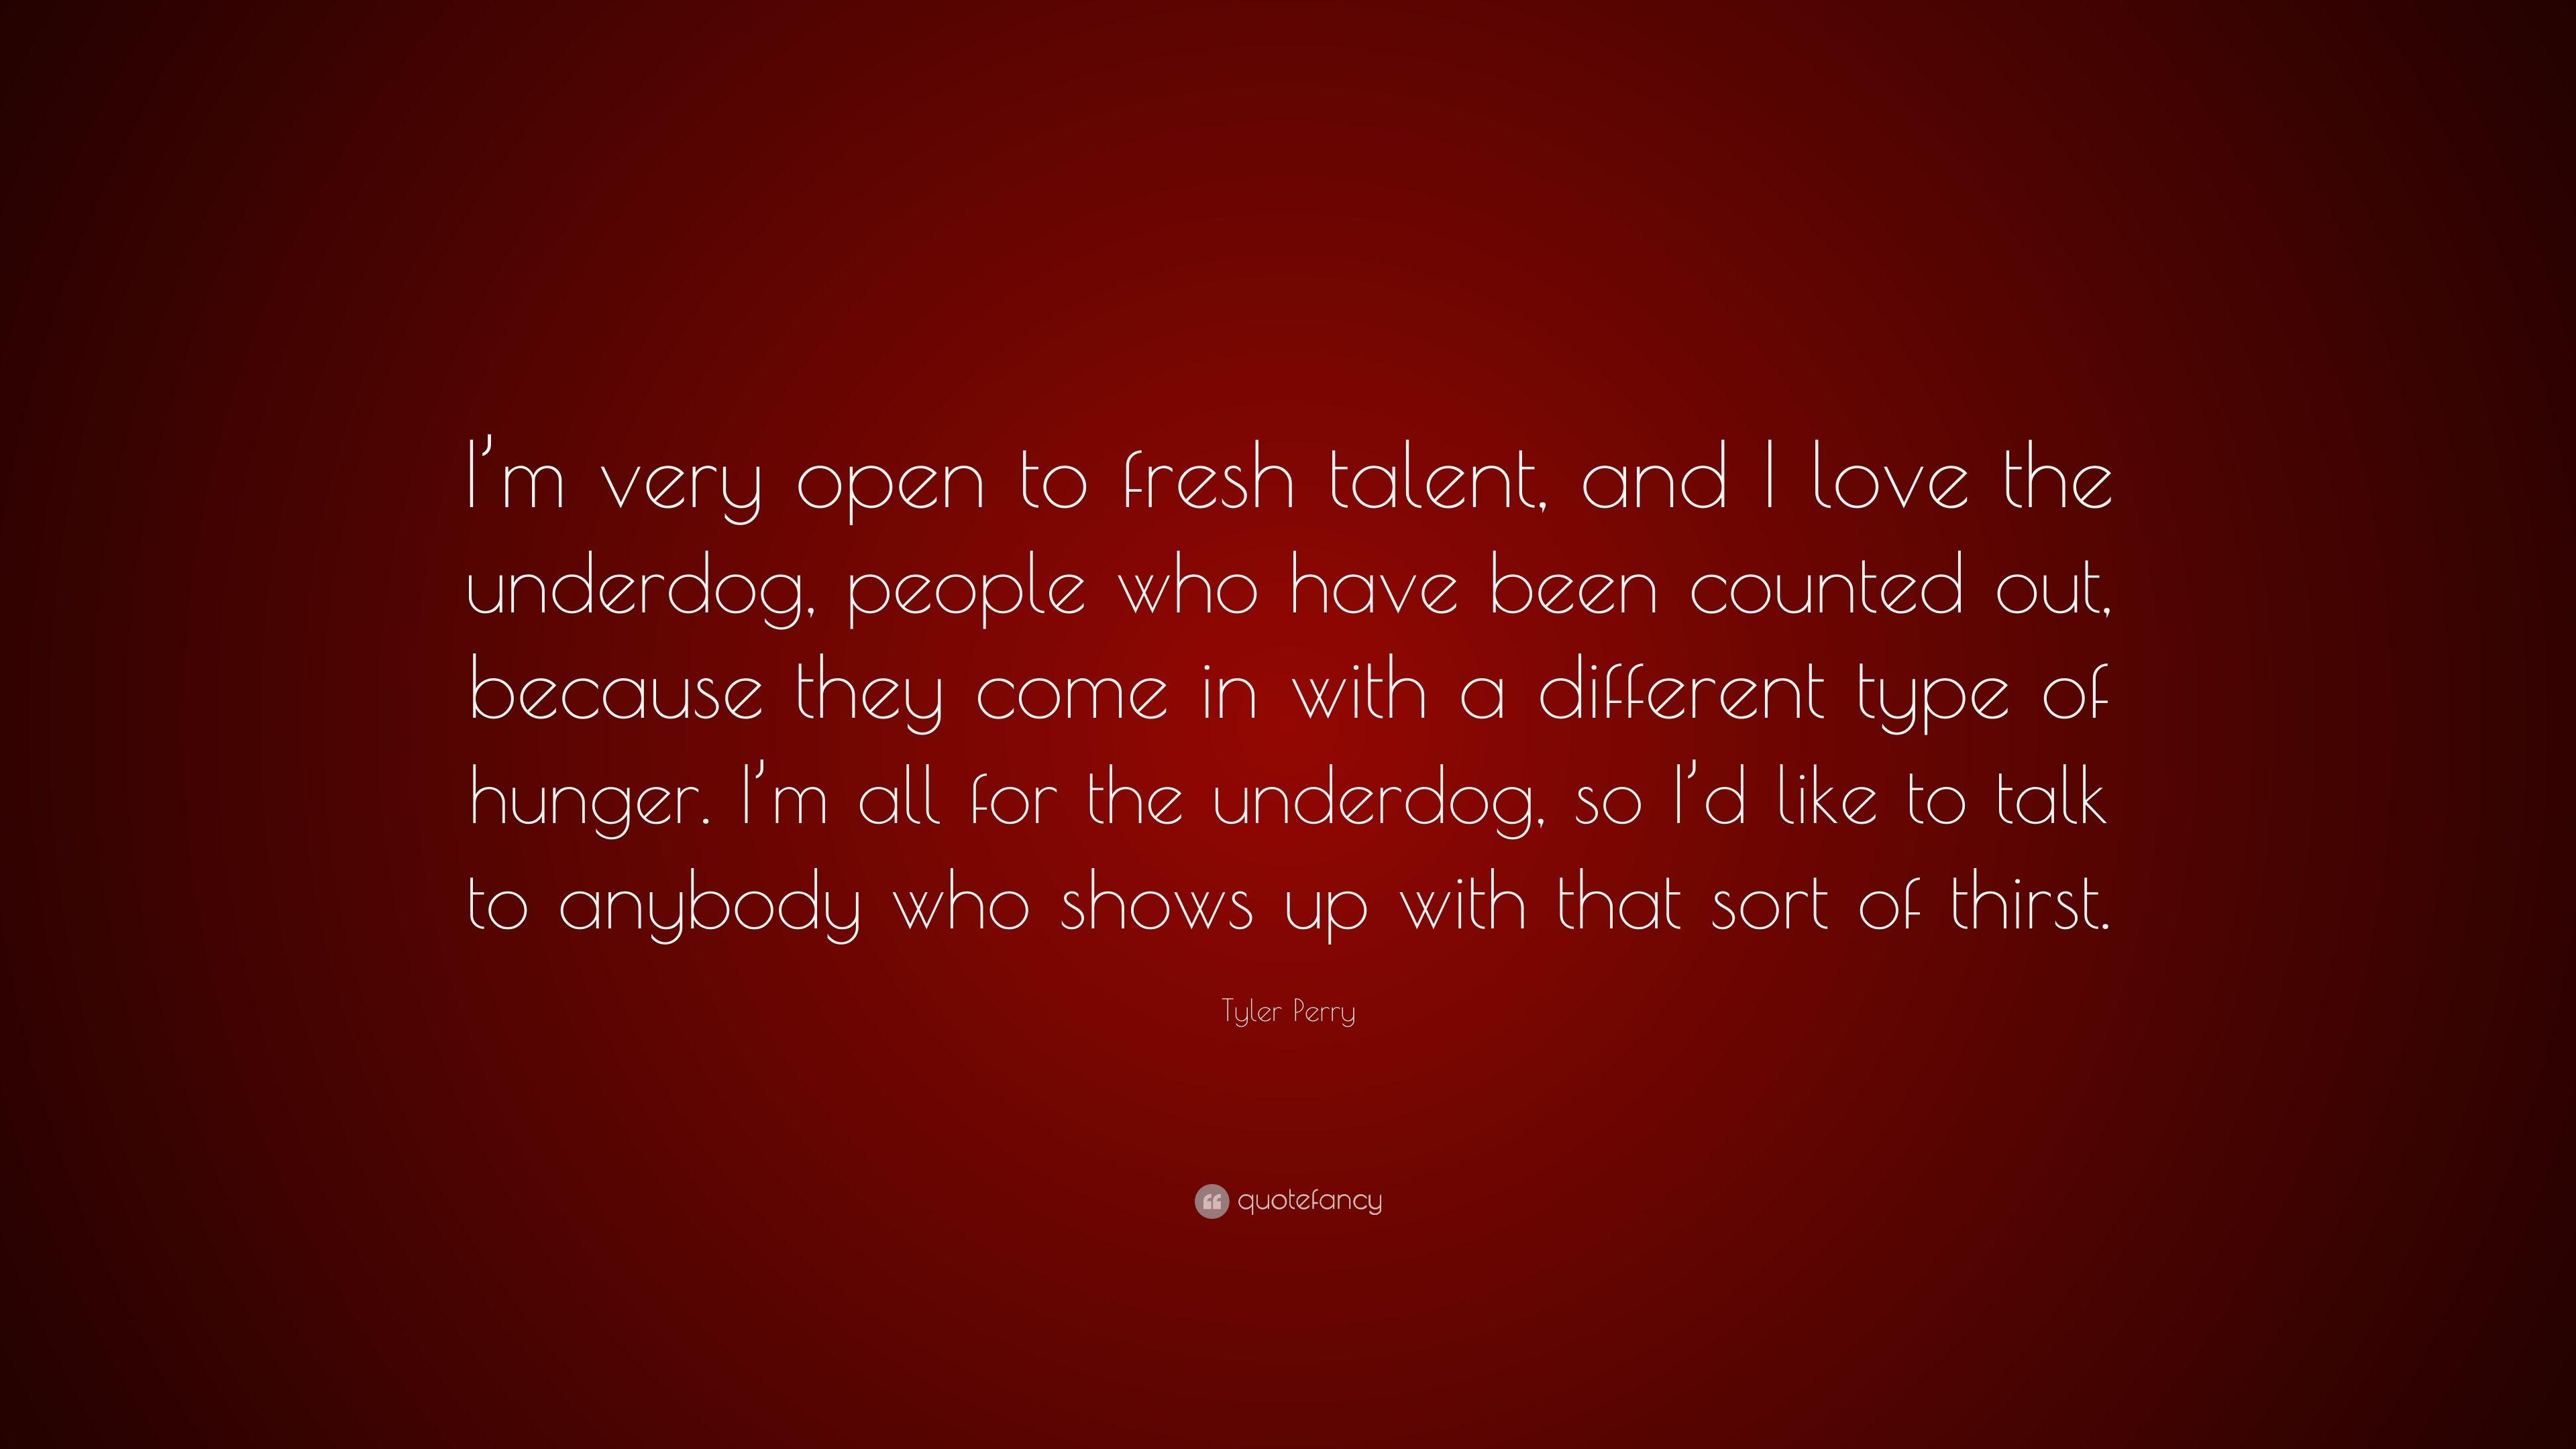 Tyler Perry Quote: “I'm very open to fresh talent, and I love the